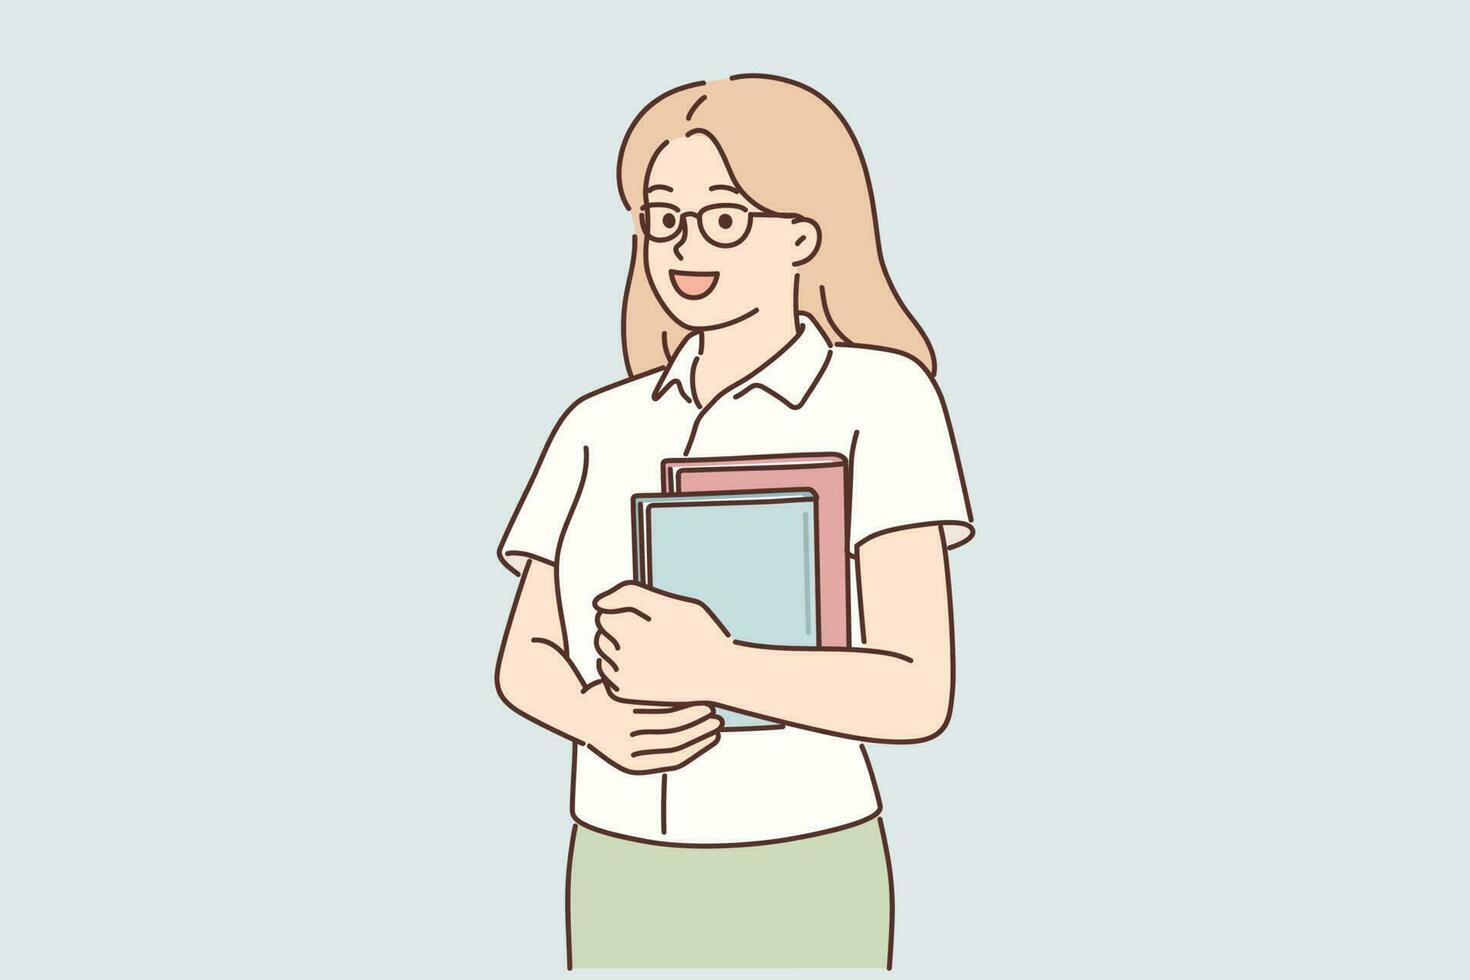 Young girl student stands with books in hands posing with glasses and looking at screen. Cheerful woman with textbooks to prepare for exams for college entrance or taking tests at school vector